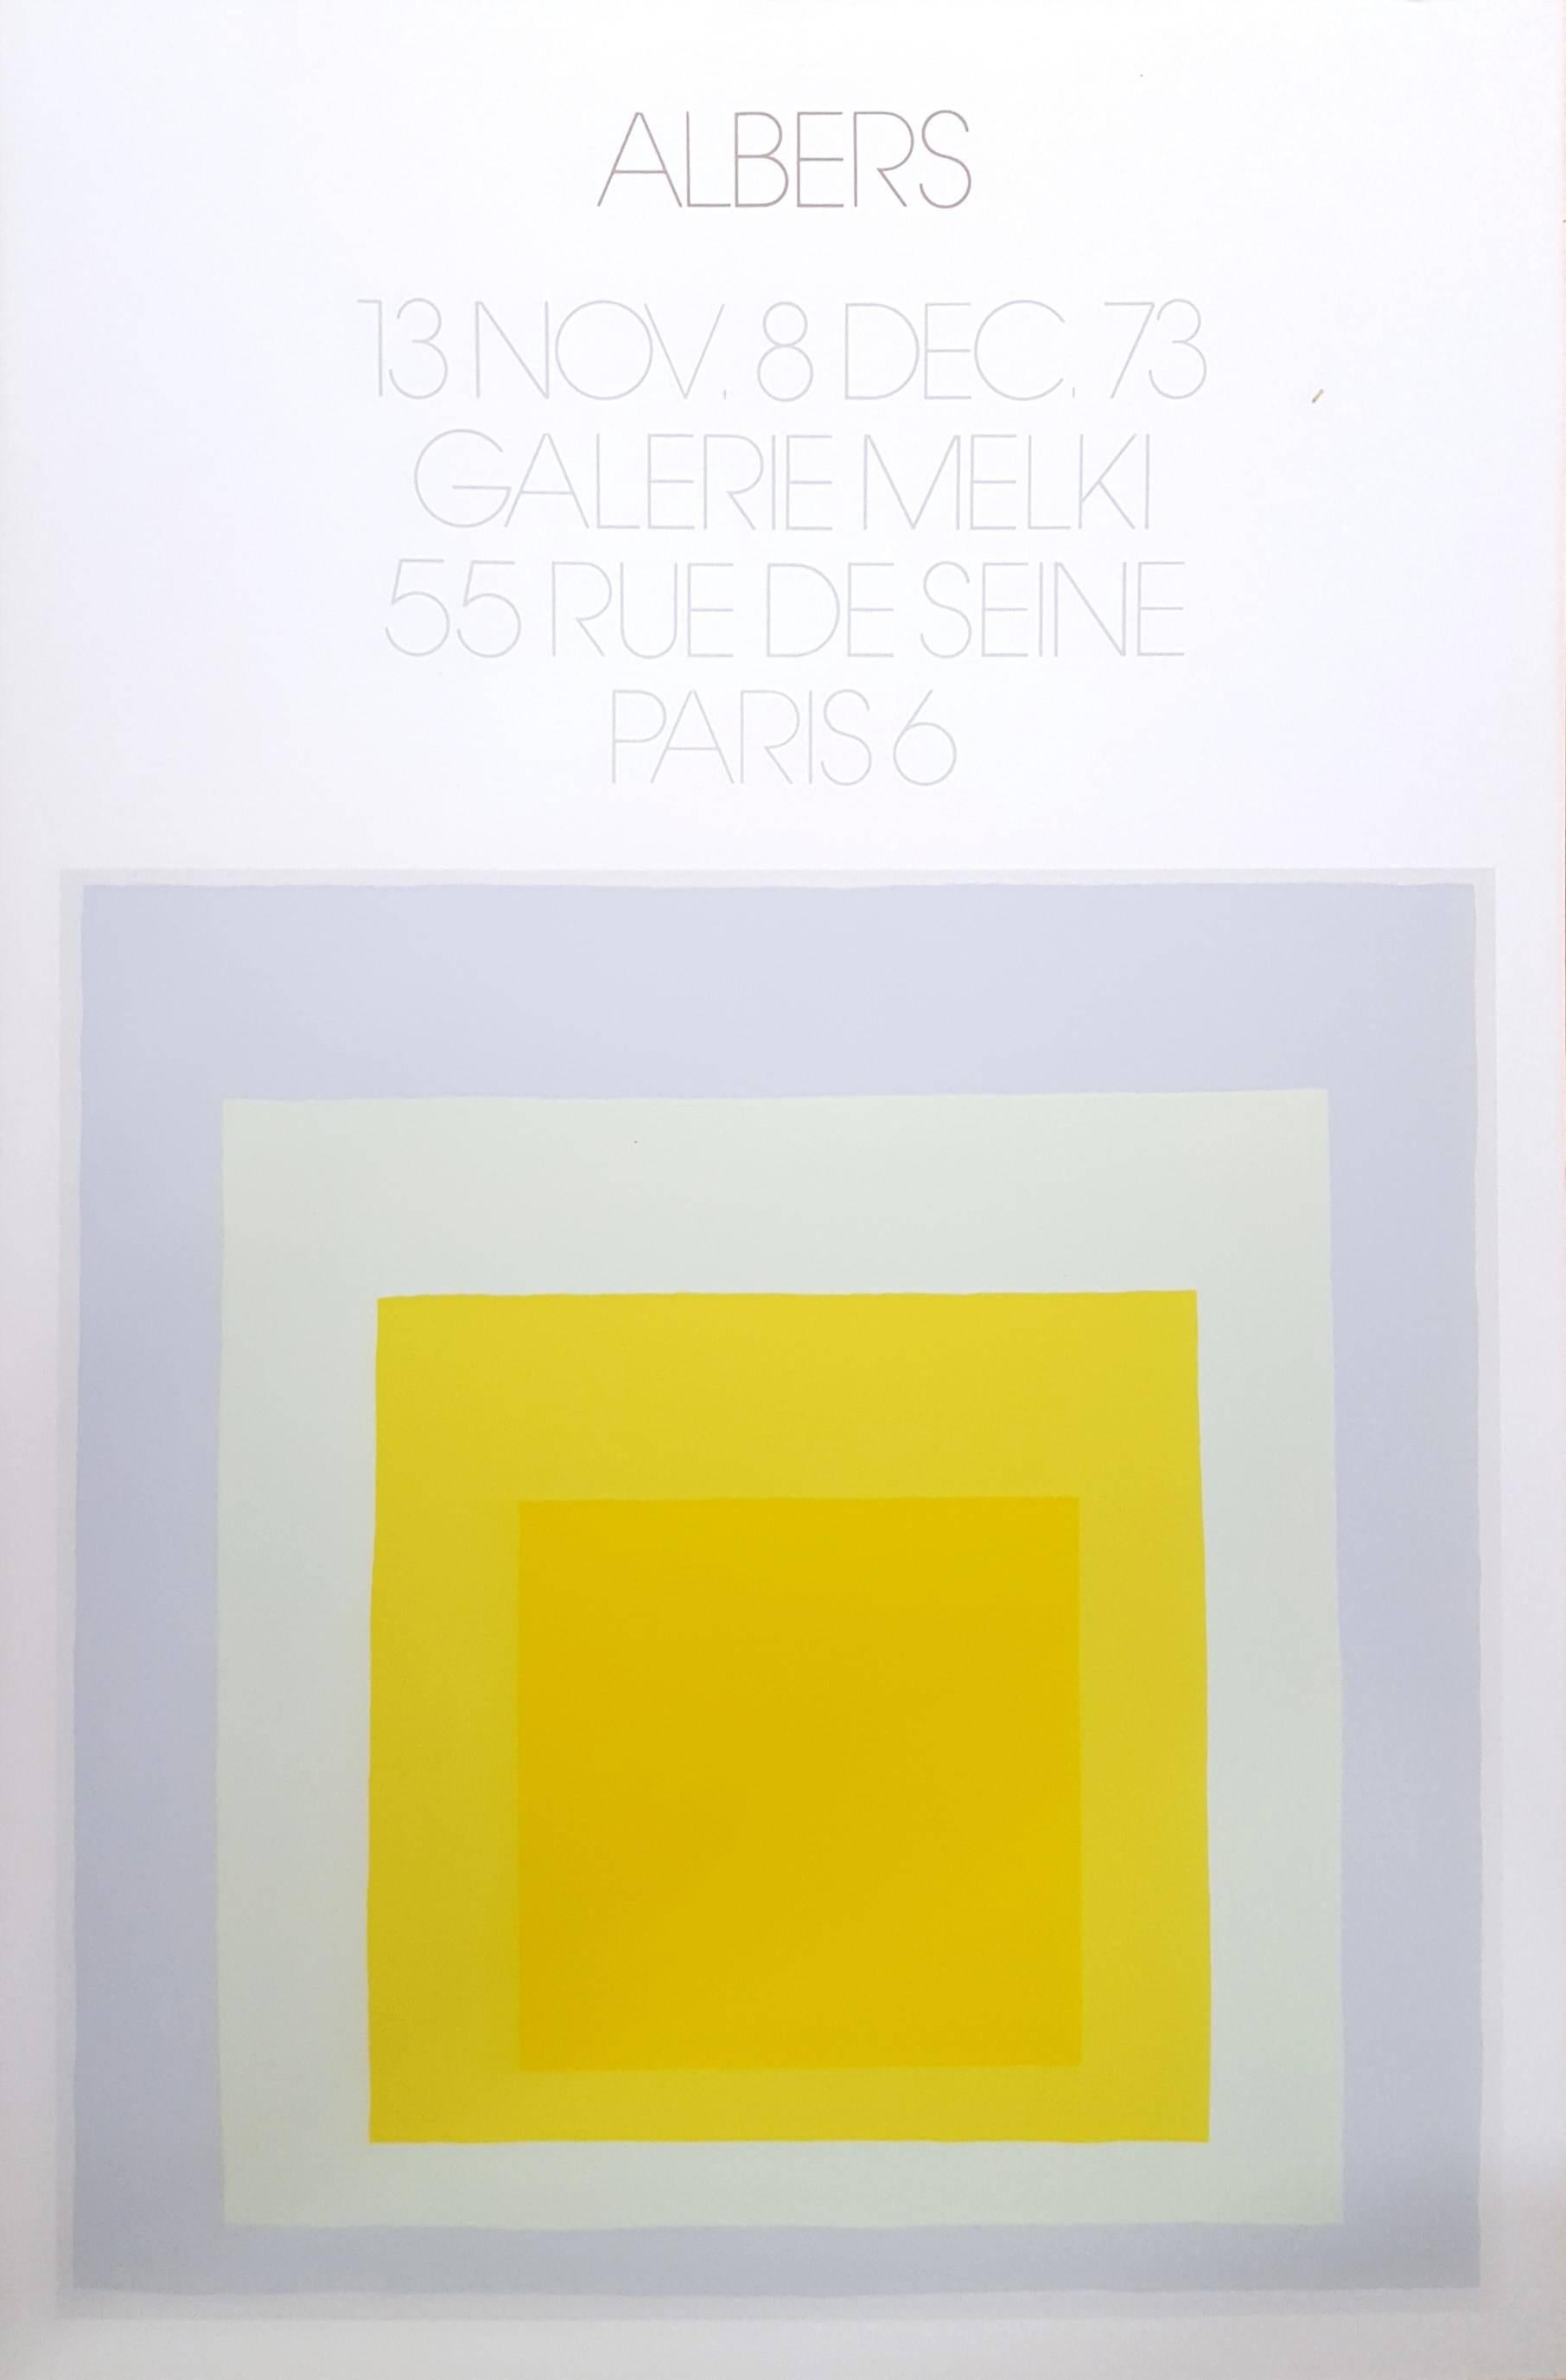 Josef Albers Abstract Print - Homage to the Square: Galerie Melki 3